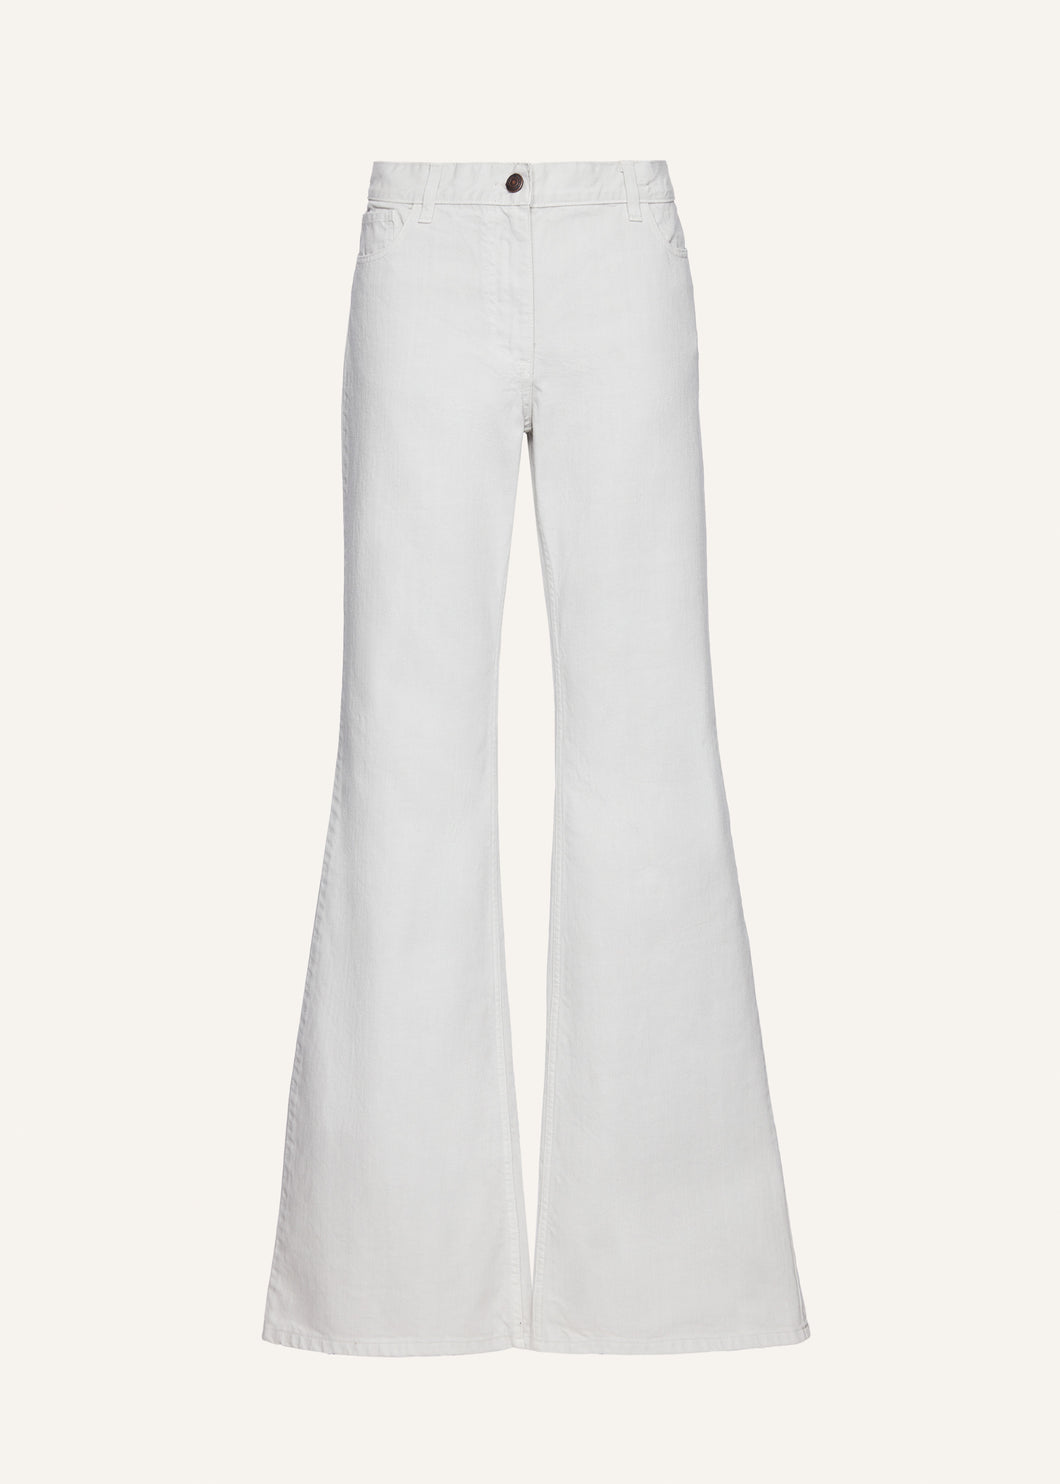 Mid-rise flare denim pants in white sand